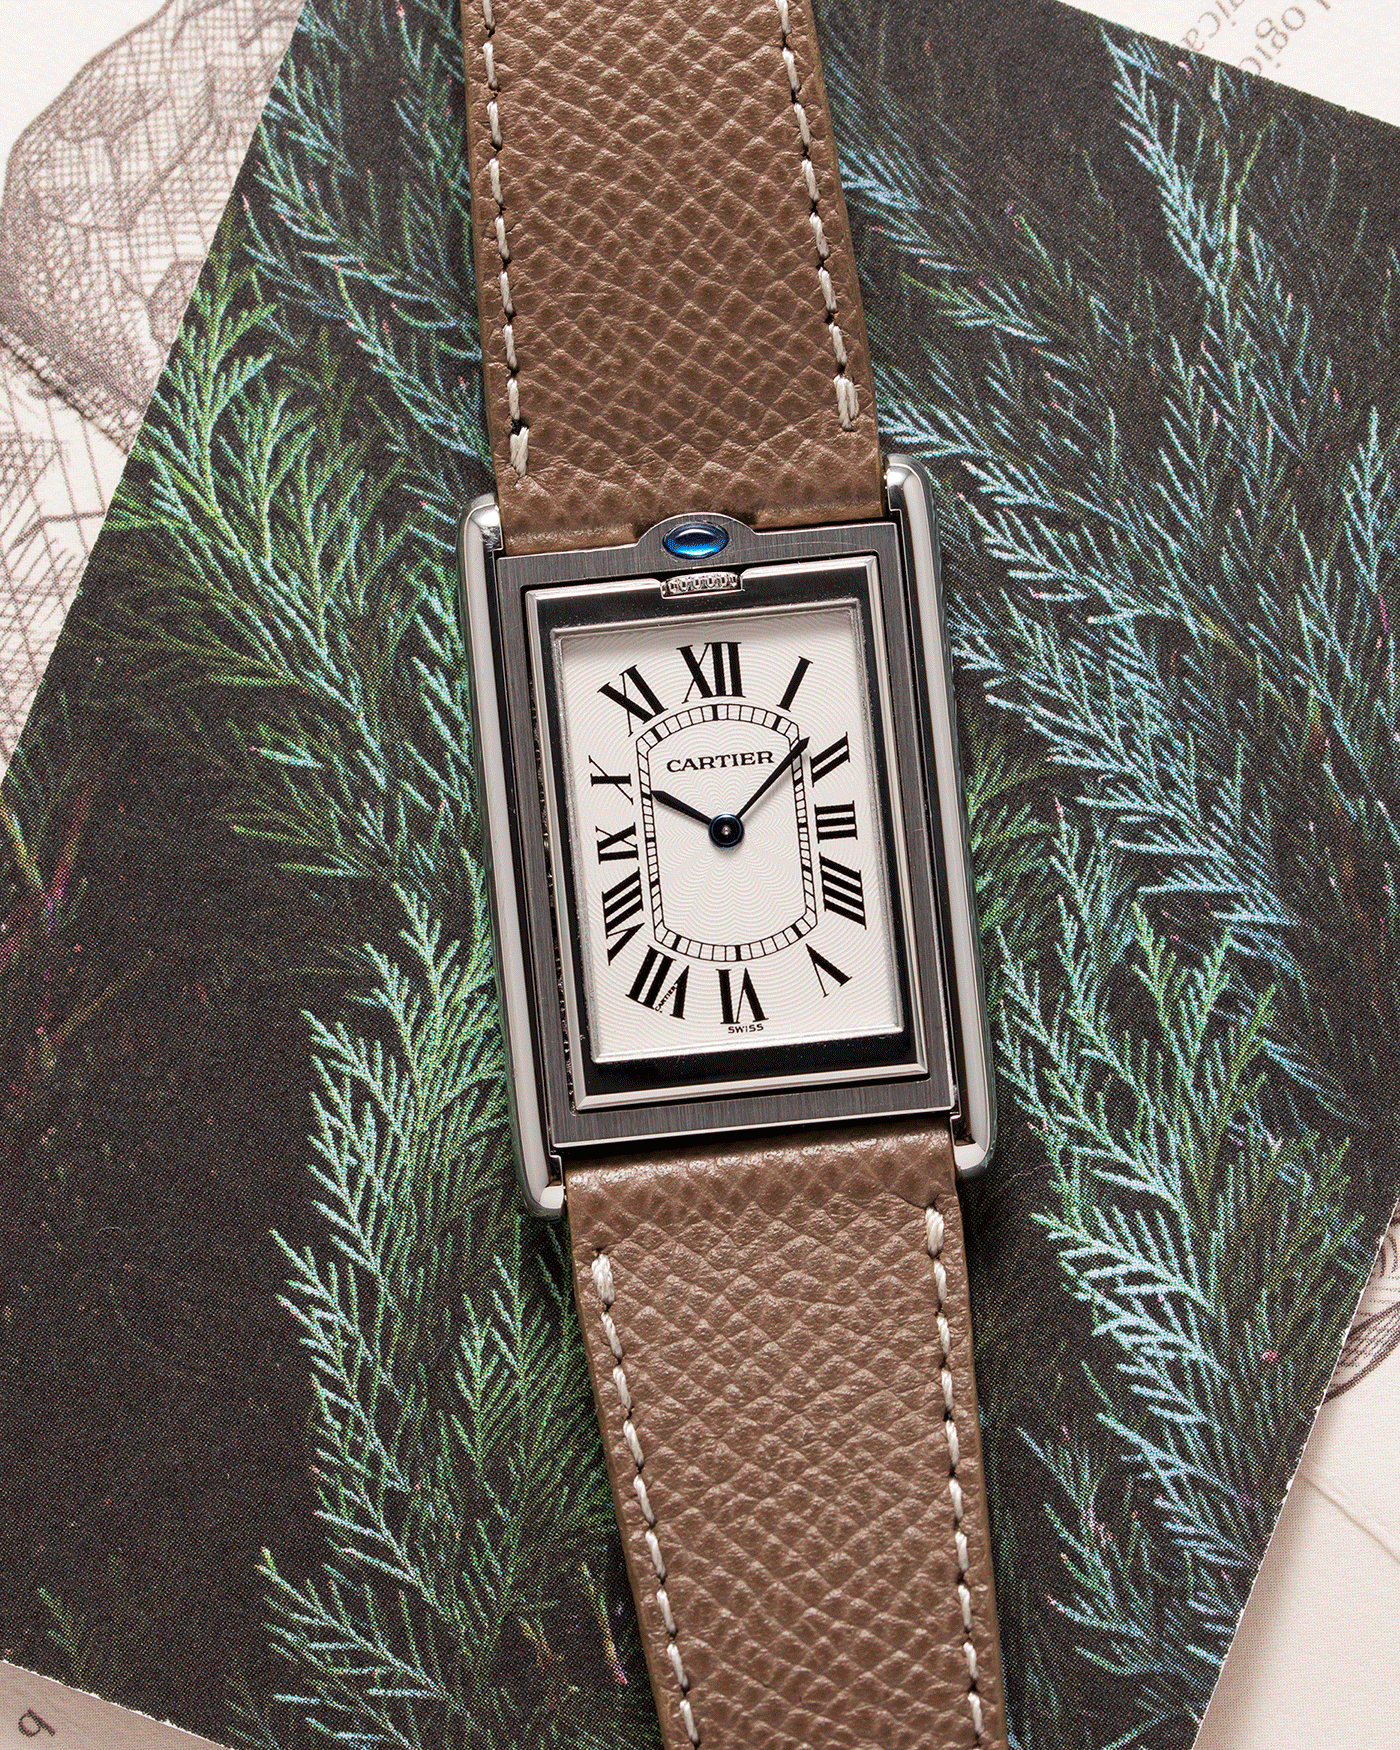  Brand: Cartier Year: 1999 Model: Tank Basculante Reference: 2390 Material: Stainless Steel Movement: Piguet-derived Cartier cal. 050 MC Case Diameter: 26 x 38mm Strap: Veblenist Taupe Grained Calf and Black Cartier Alligator with Cartier Stainless Steel Tang Buckle